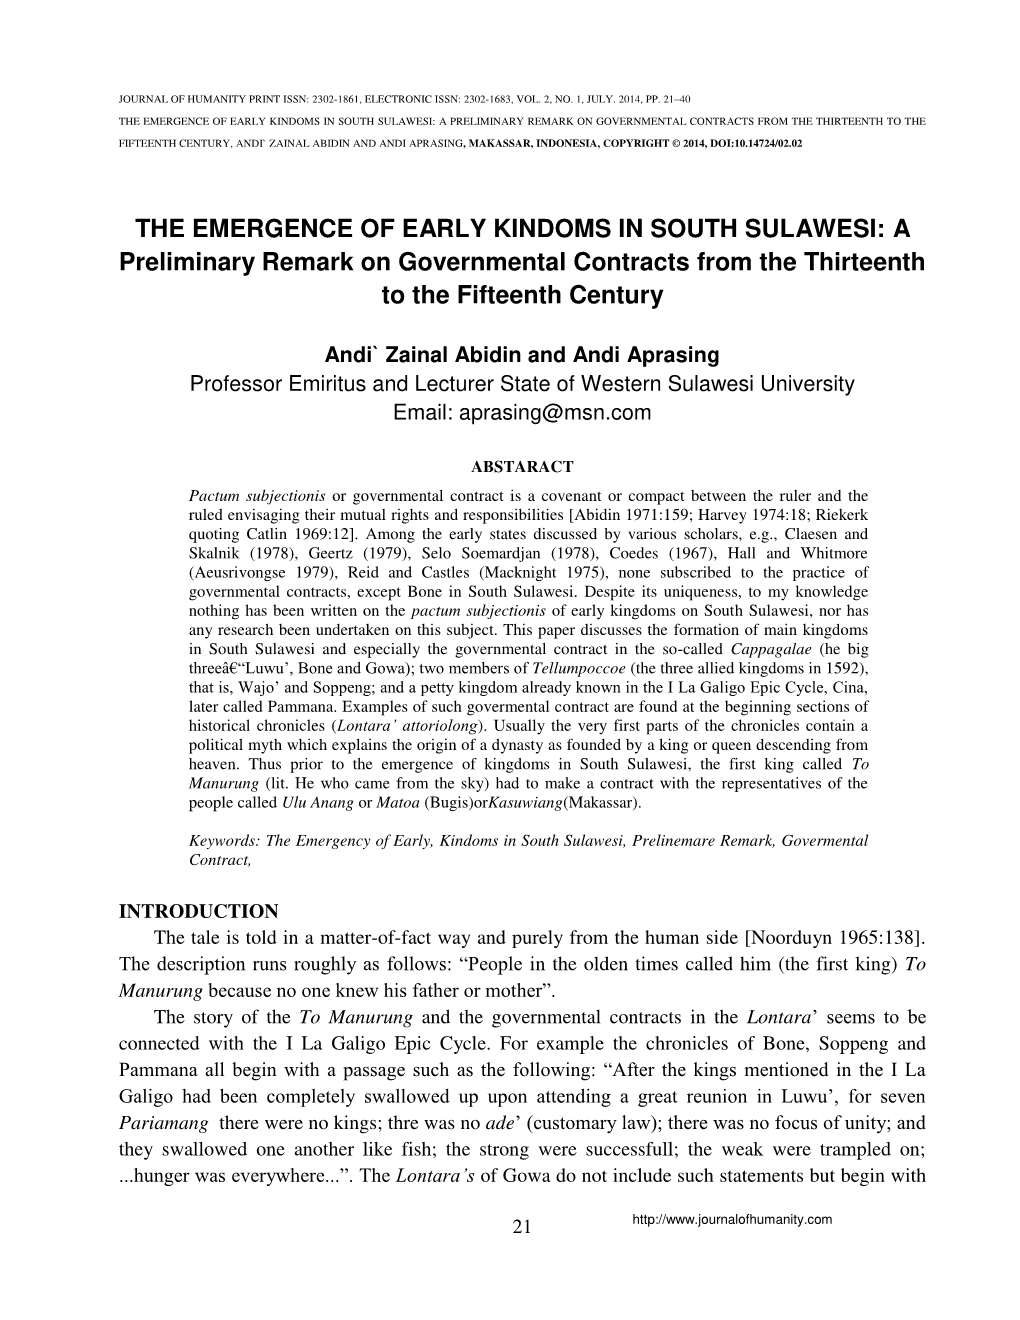 The Emergence of Early Kindoms in South Sulawesi: a Preliminary Remark on Governmental Contracts from the Thirteenth to The